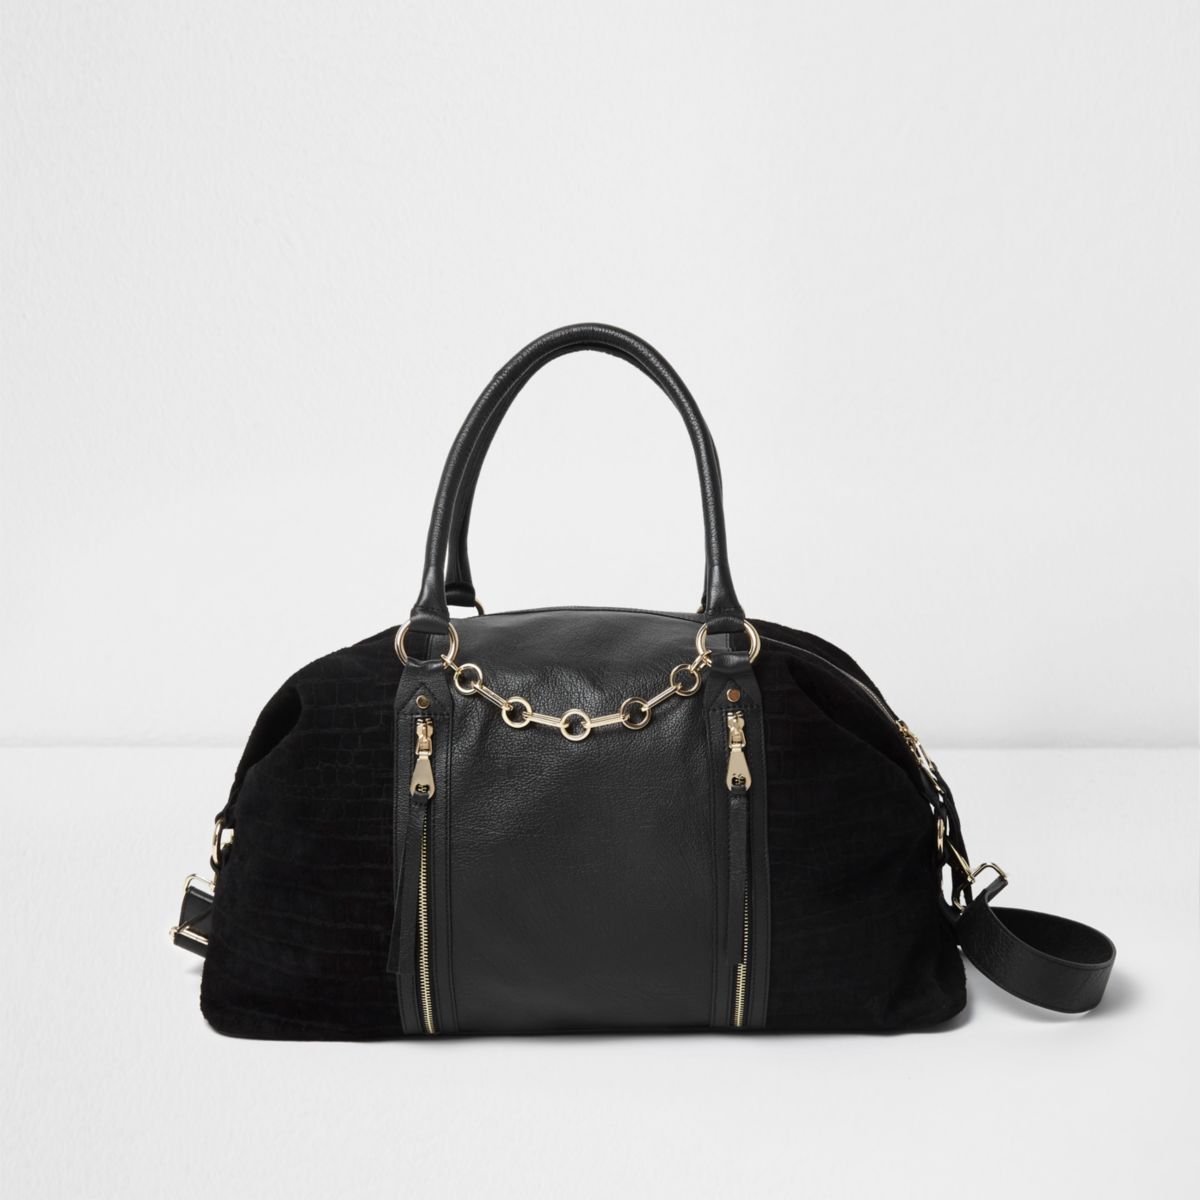 Black suede and leather weekend bag - Bags & Purses - Sale - women